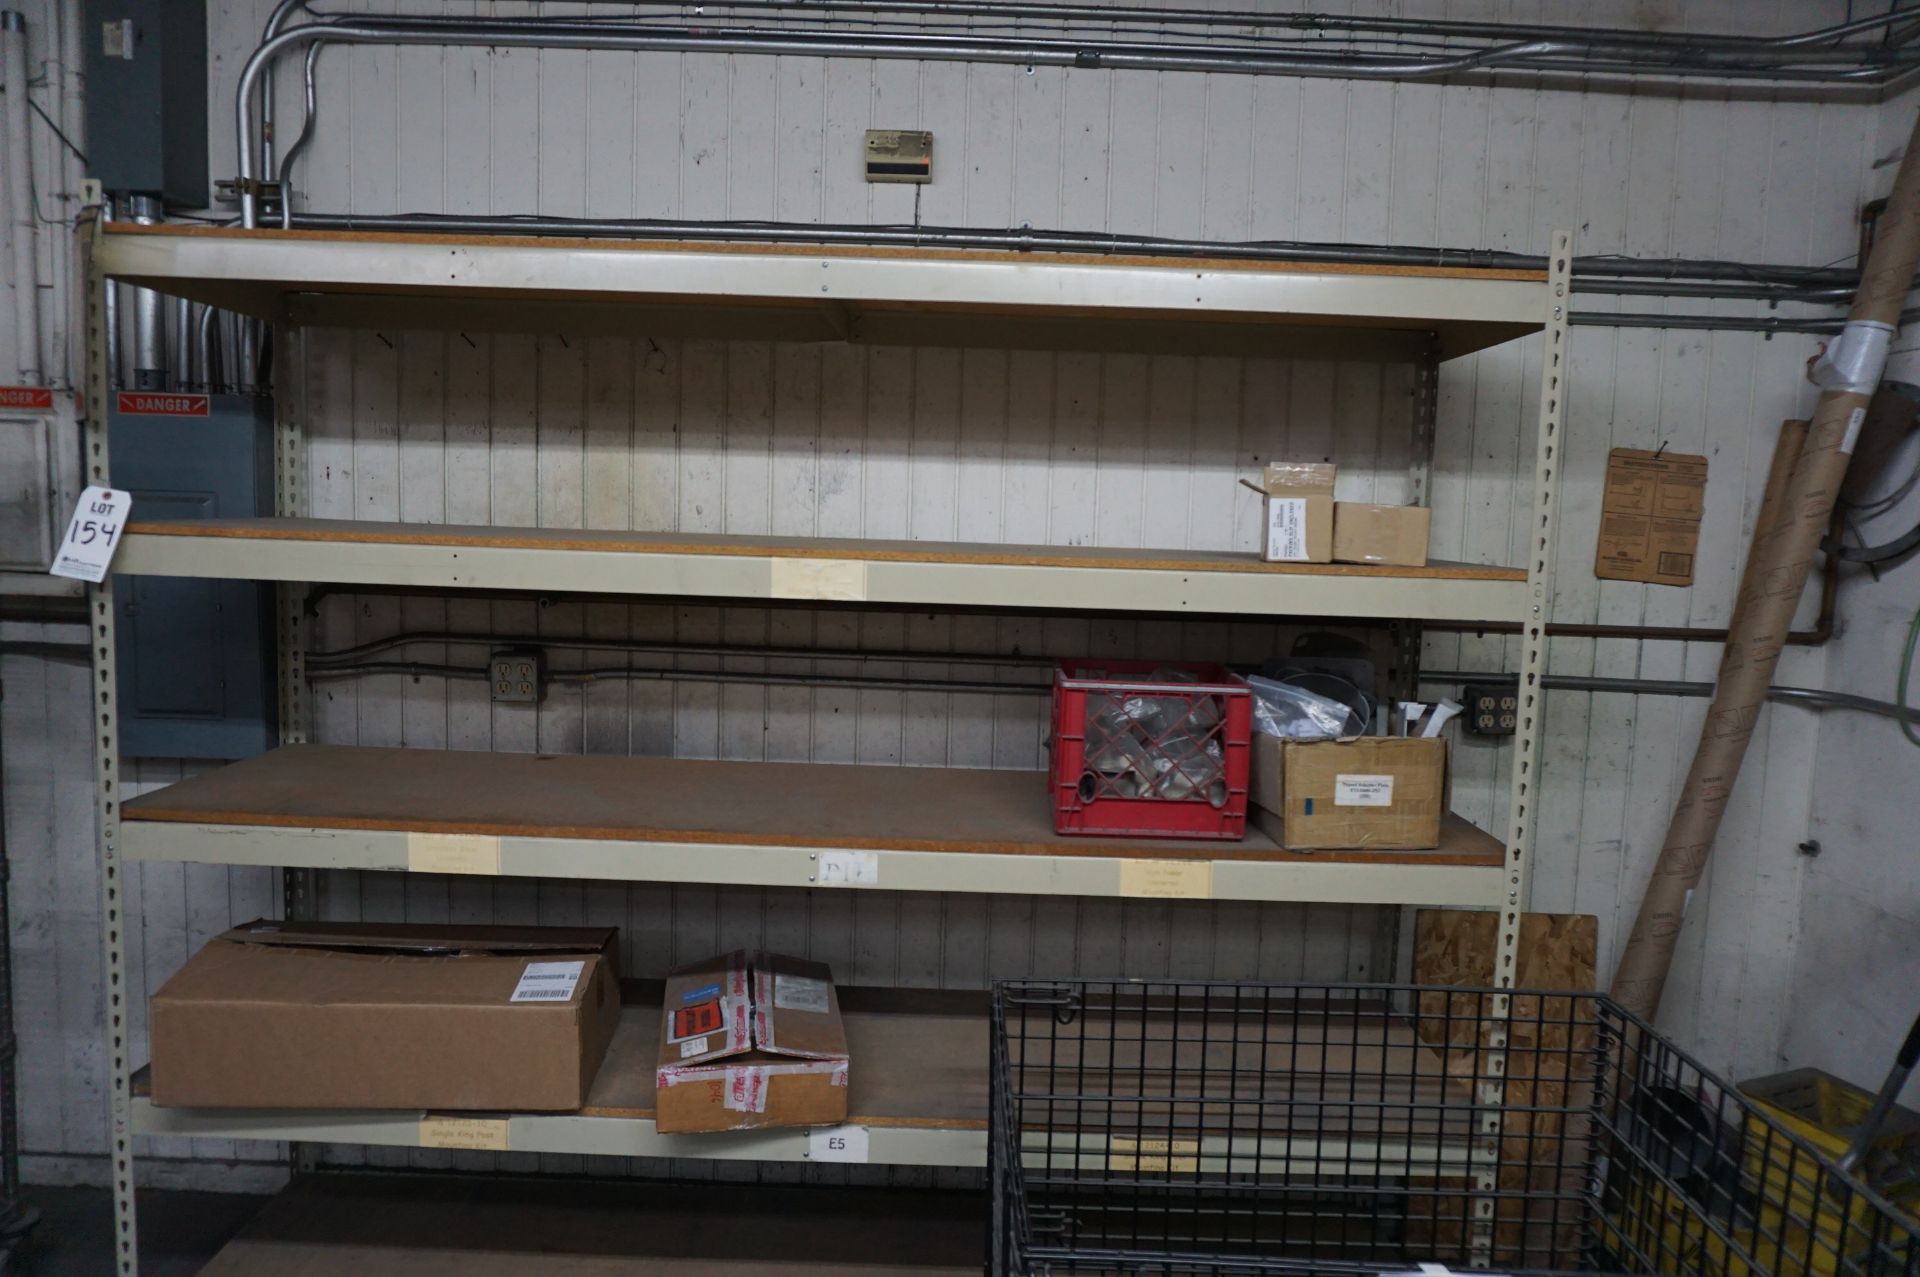 SHIPPING AREA WITH CONTENTS TO INCLUDE:EBRA LP 2844 LABEL PRINTER, DIGITAL SCALE, SHELVING UNIT 2' X - Image 8 of 21